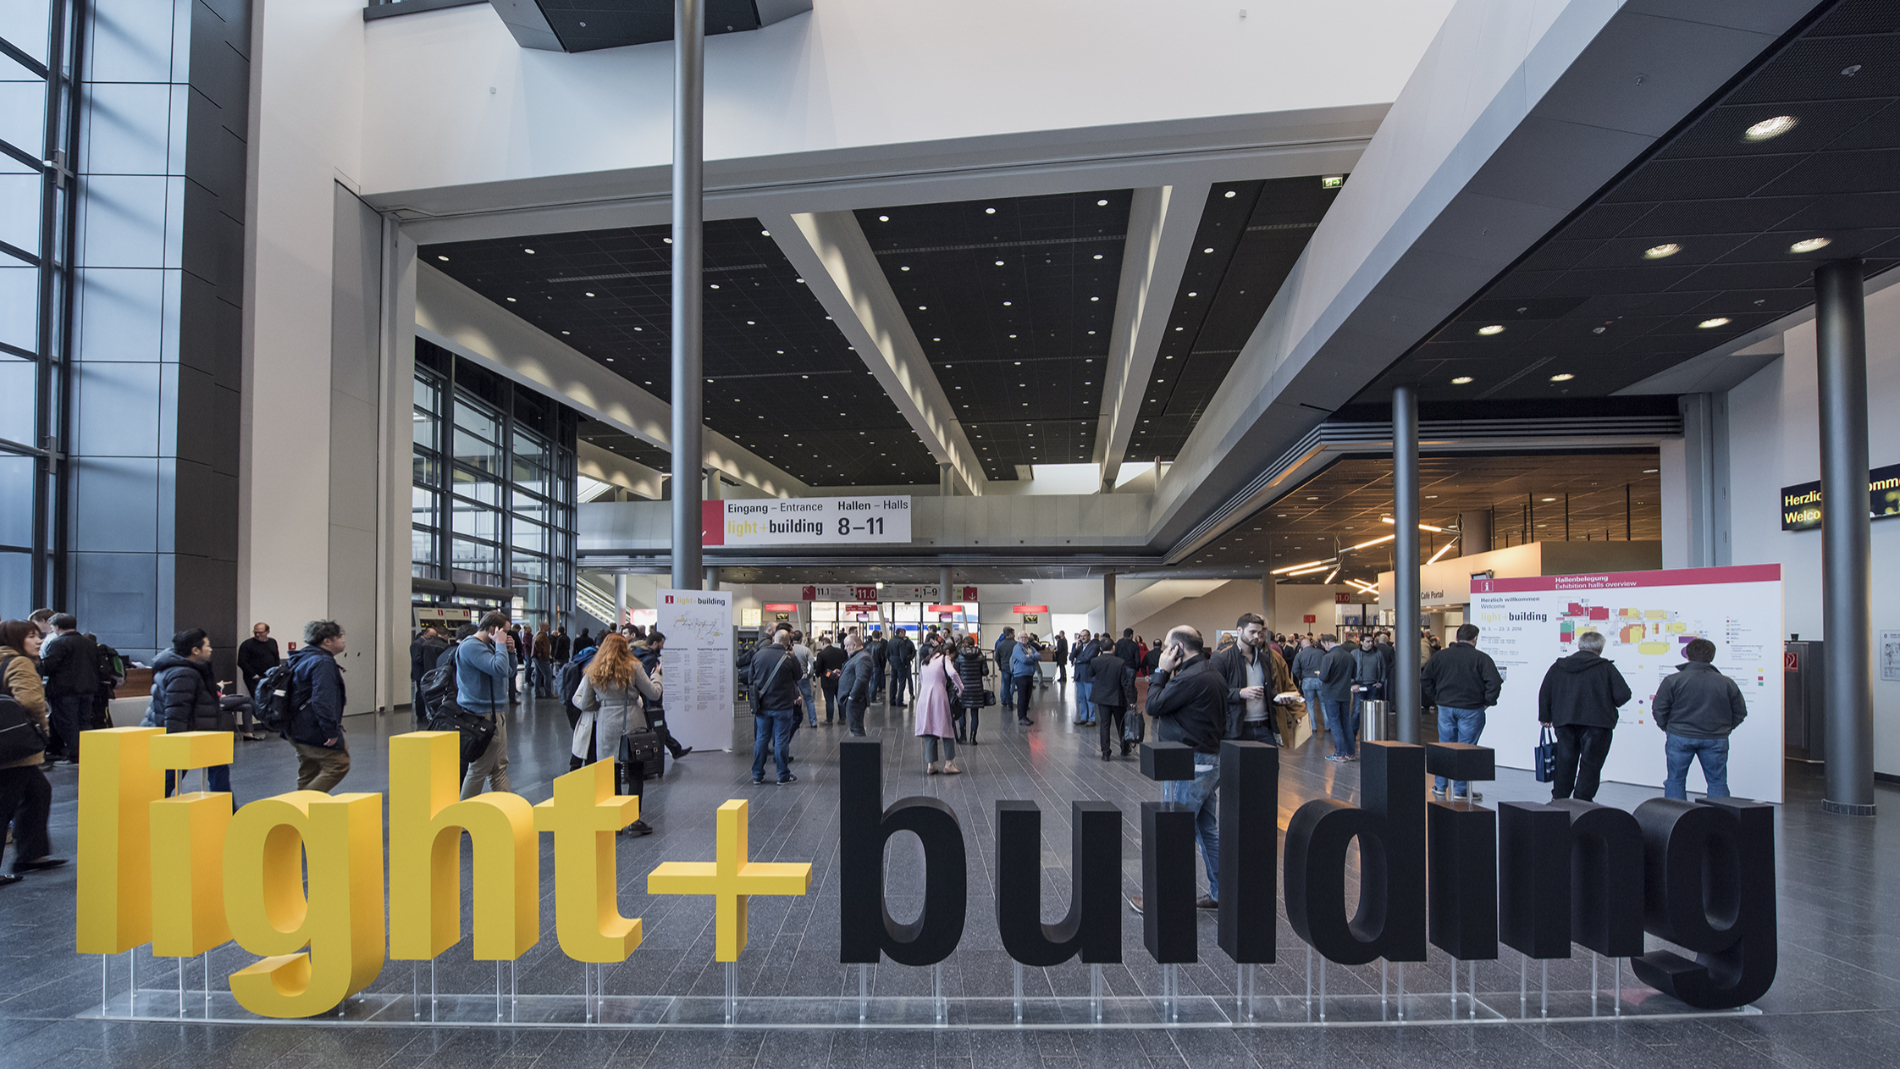 Over 1,500 exhibitors from 46 countries, including many top brands, will be showing their latest products and innovations at Light + Building Autumn Edition. (Source: Messe Frankfurt Exhibition GmbH)